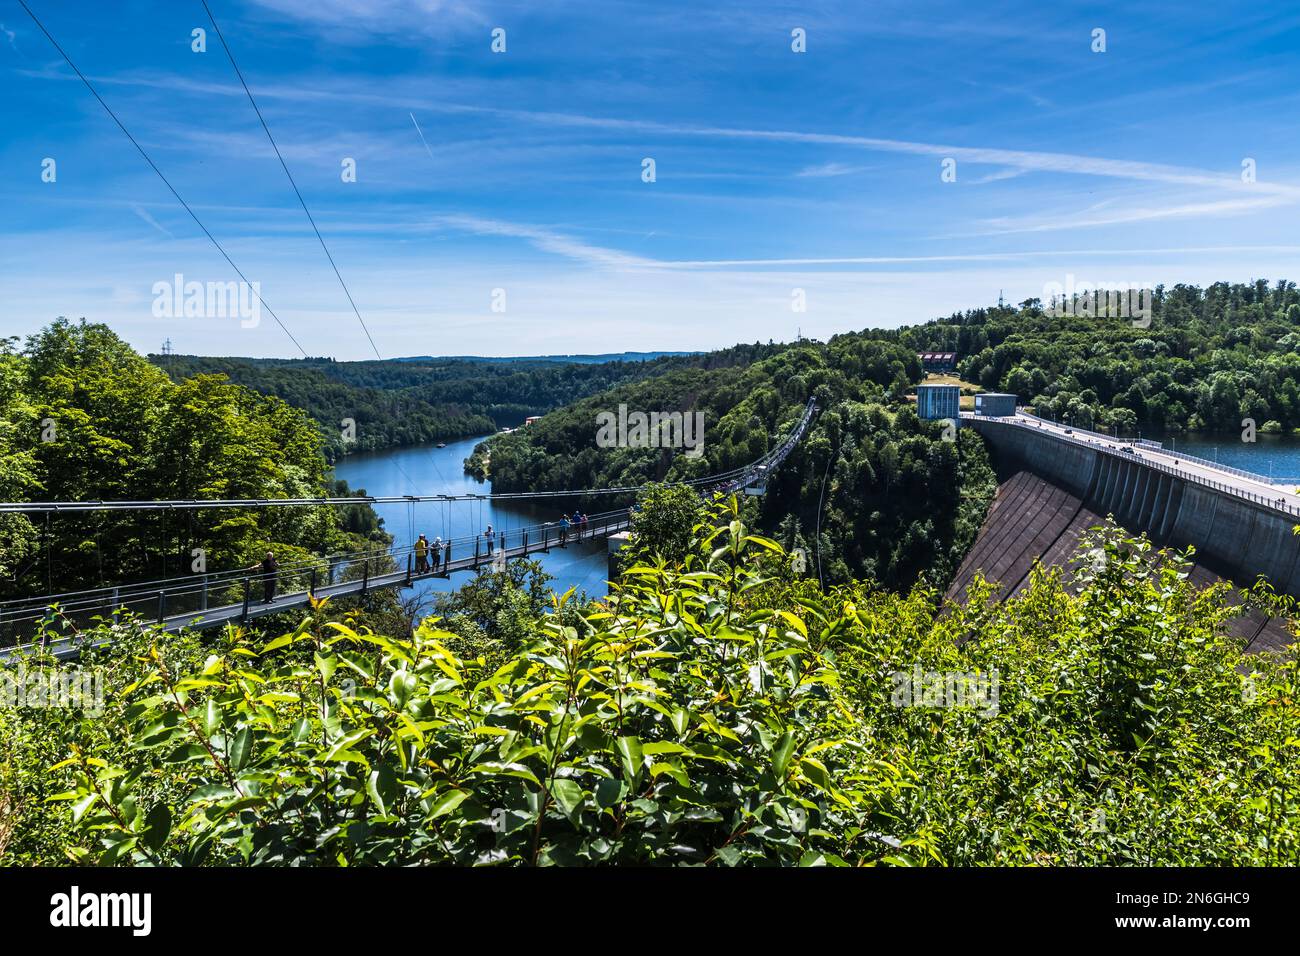 Titan RT rope suspension bridge over the Rappbodetalsperre (rappbode dam) in the Harz Mountains in Germany. Stock Photo